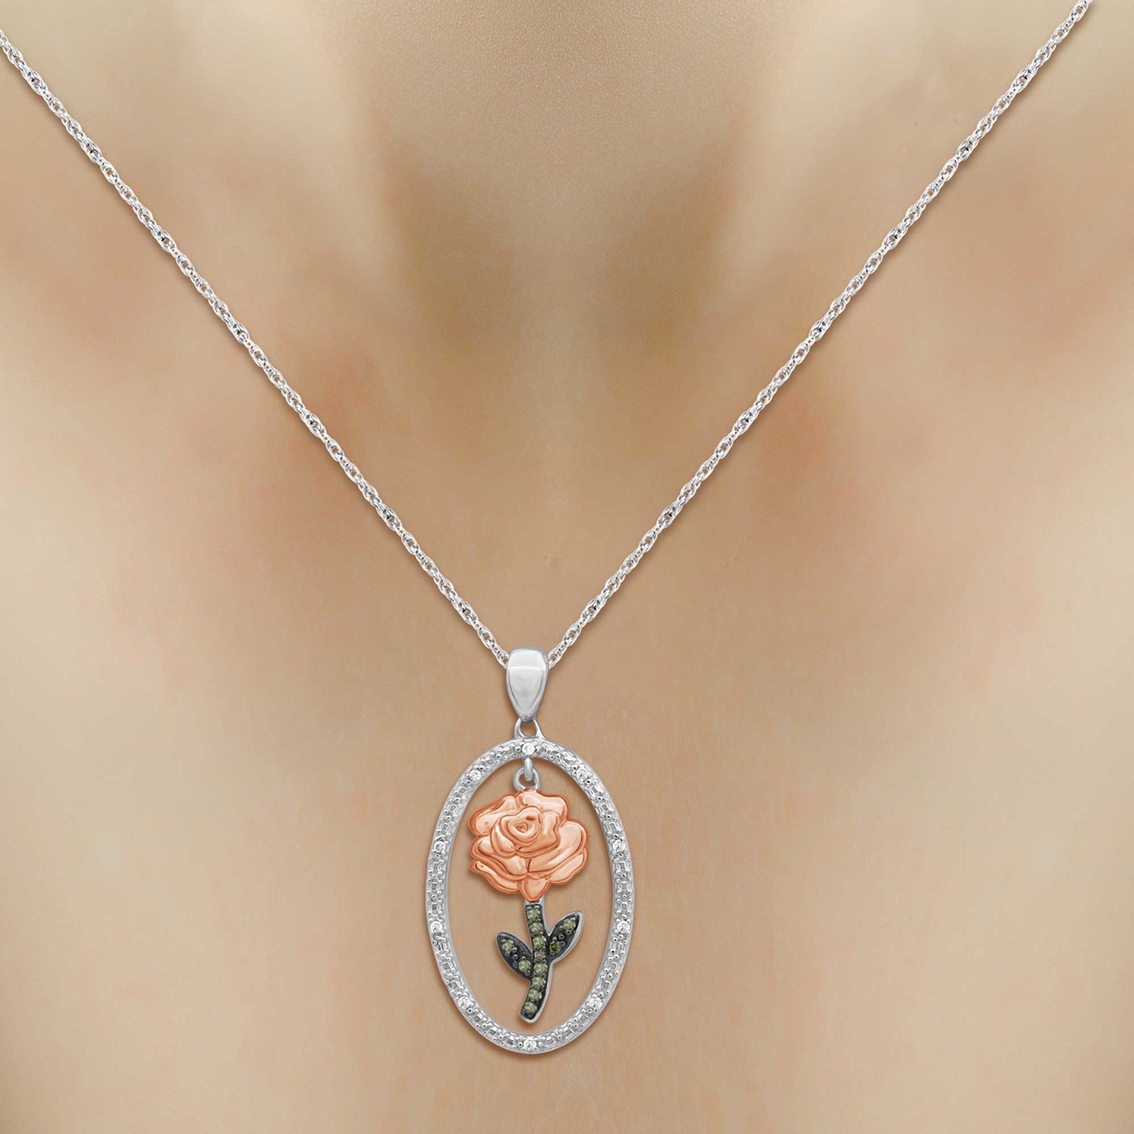 She Shines 14K Gold Over Sterling Silver 1/10 CTW Diamond Dangling Rose Pendant - Image 3 of 4